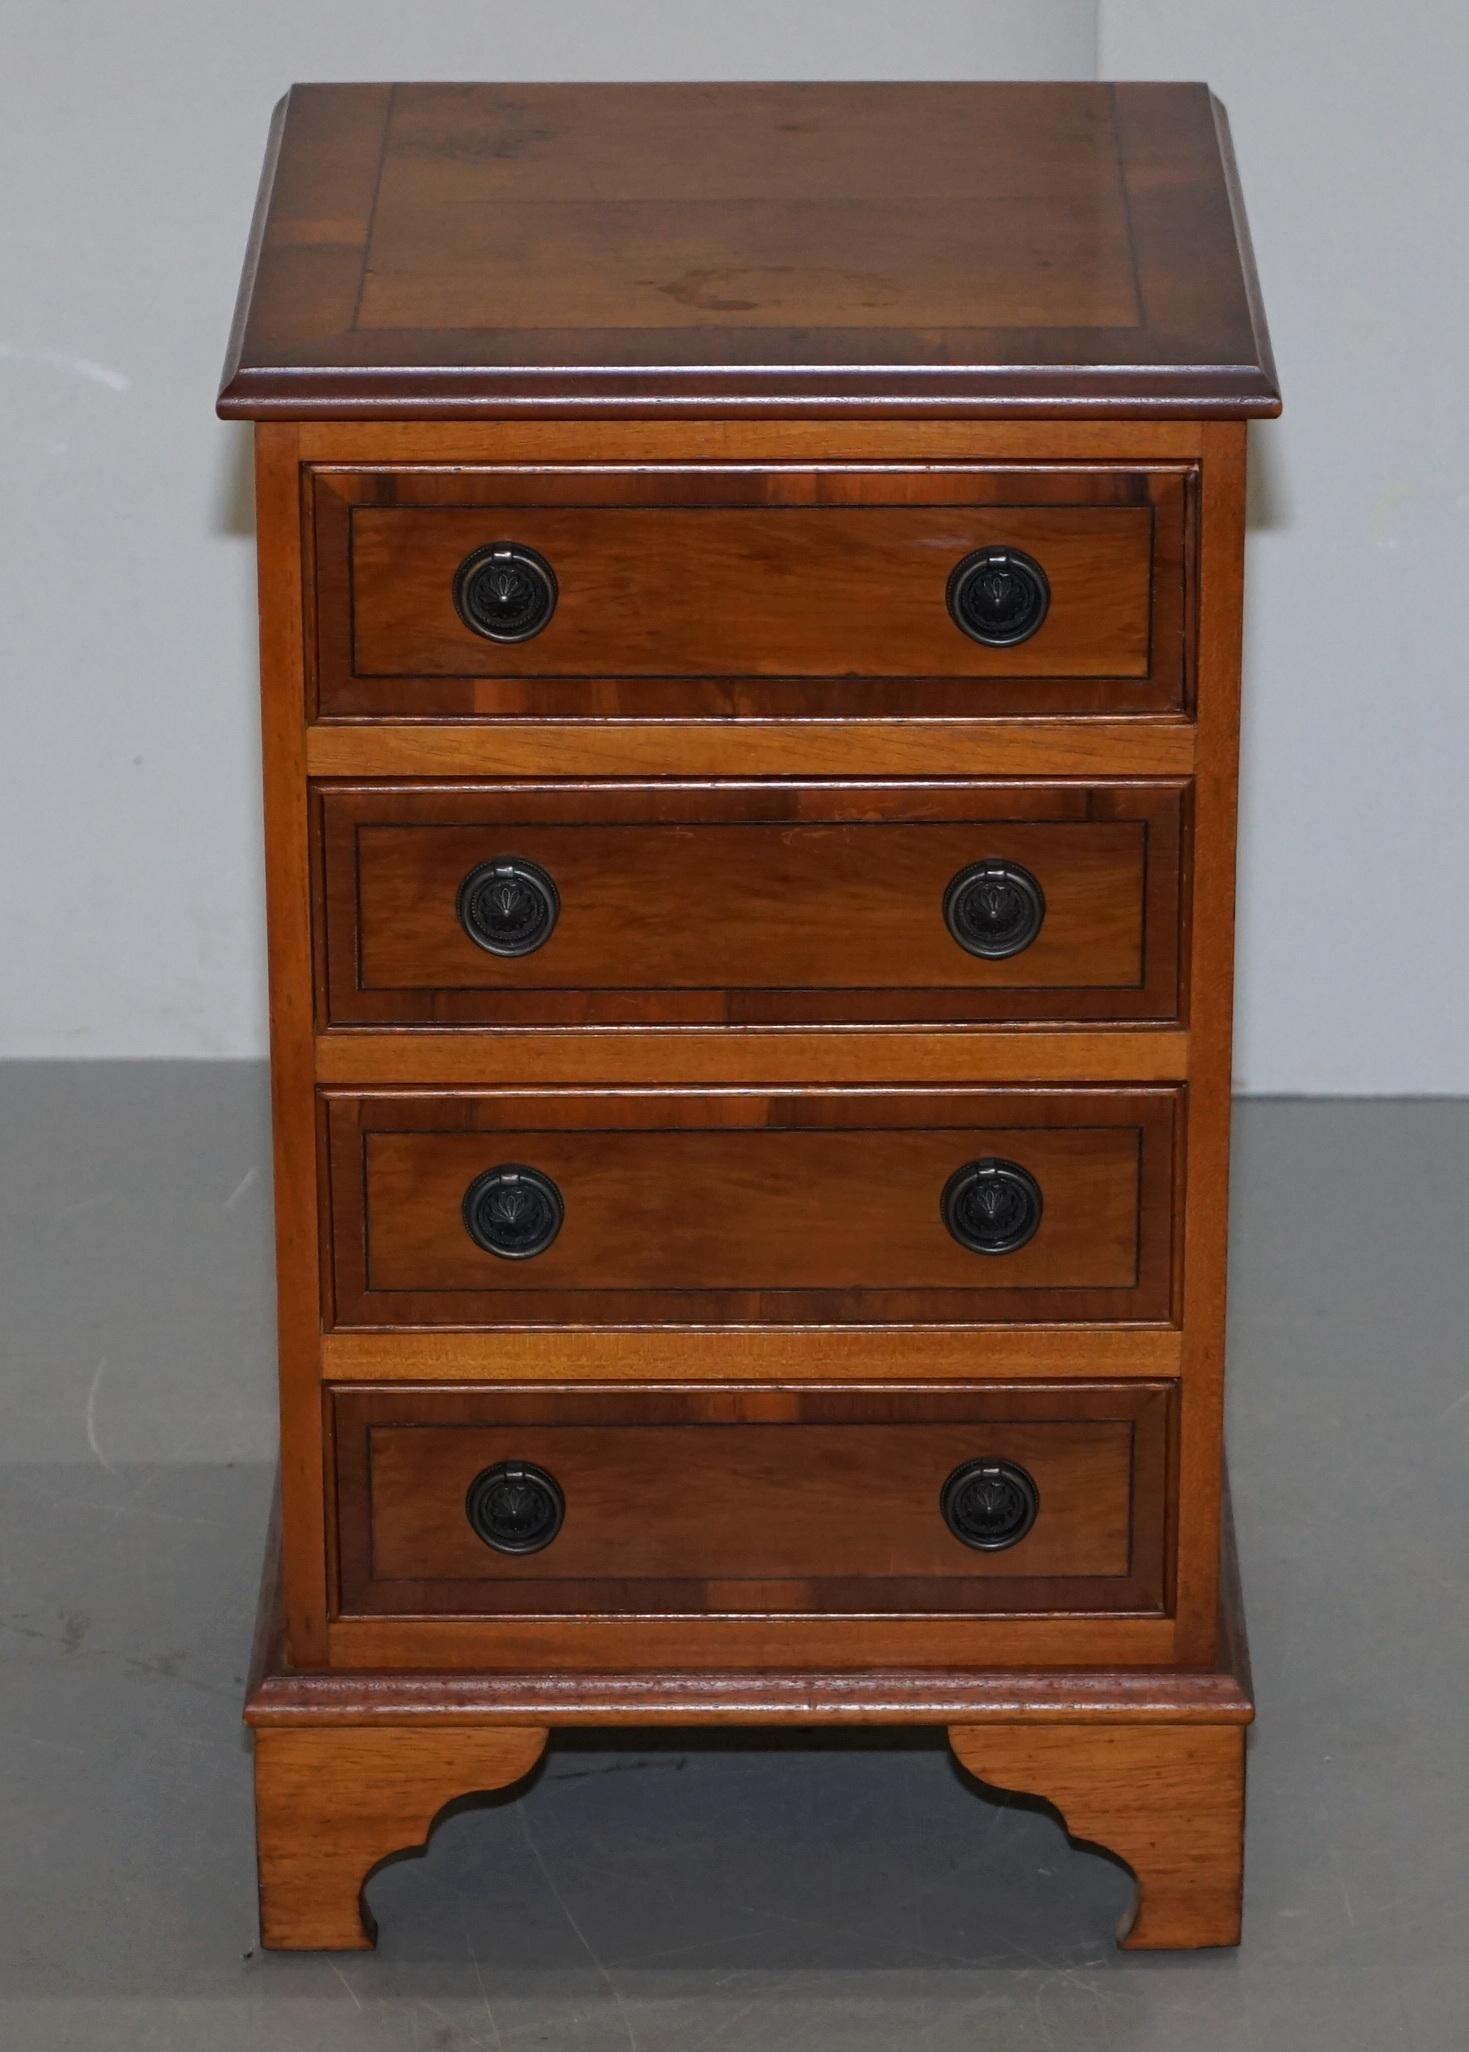 We are delighted to offer for sale this lovely Georgian style burr yew wood side table sized chest of drawers

A good looking well made and decorative little chest of drawers, made in the Classic Georgian style, with burr yew wood throughout

We